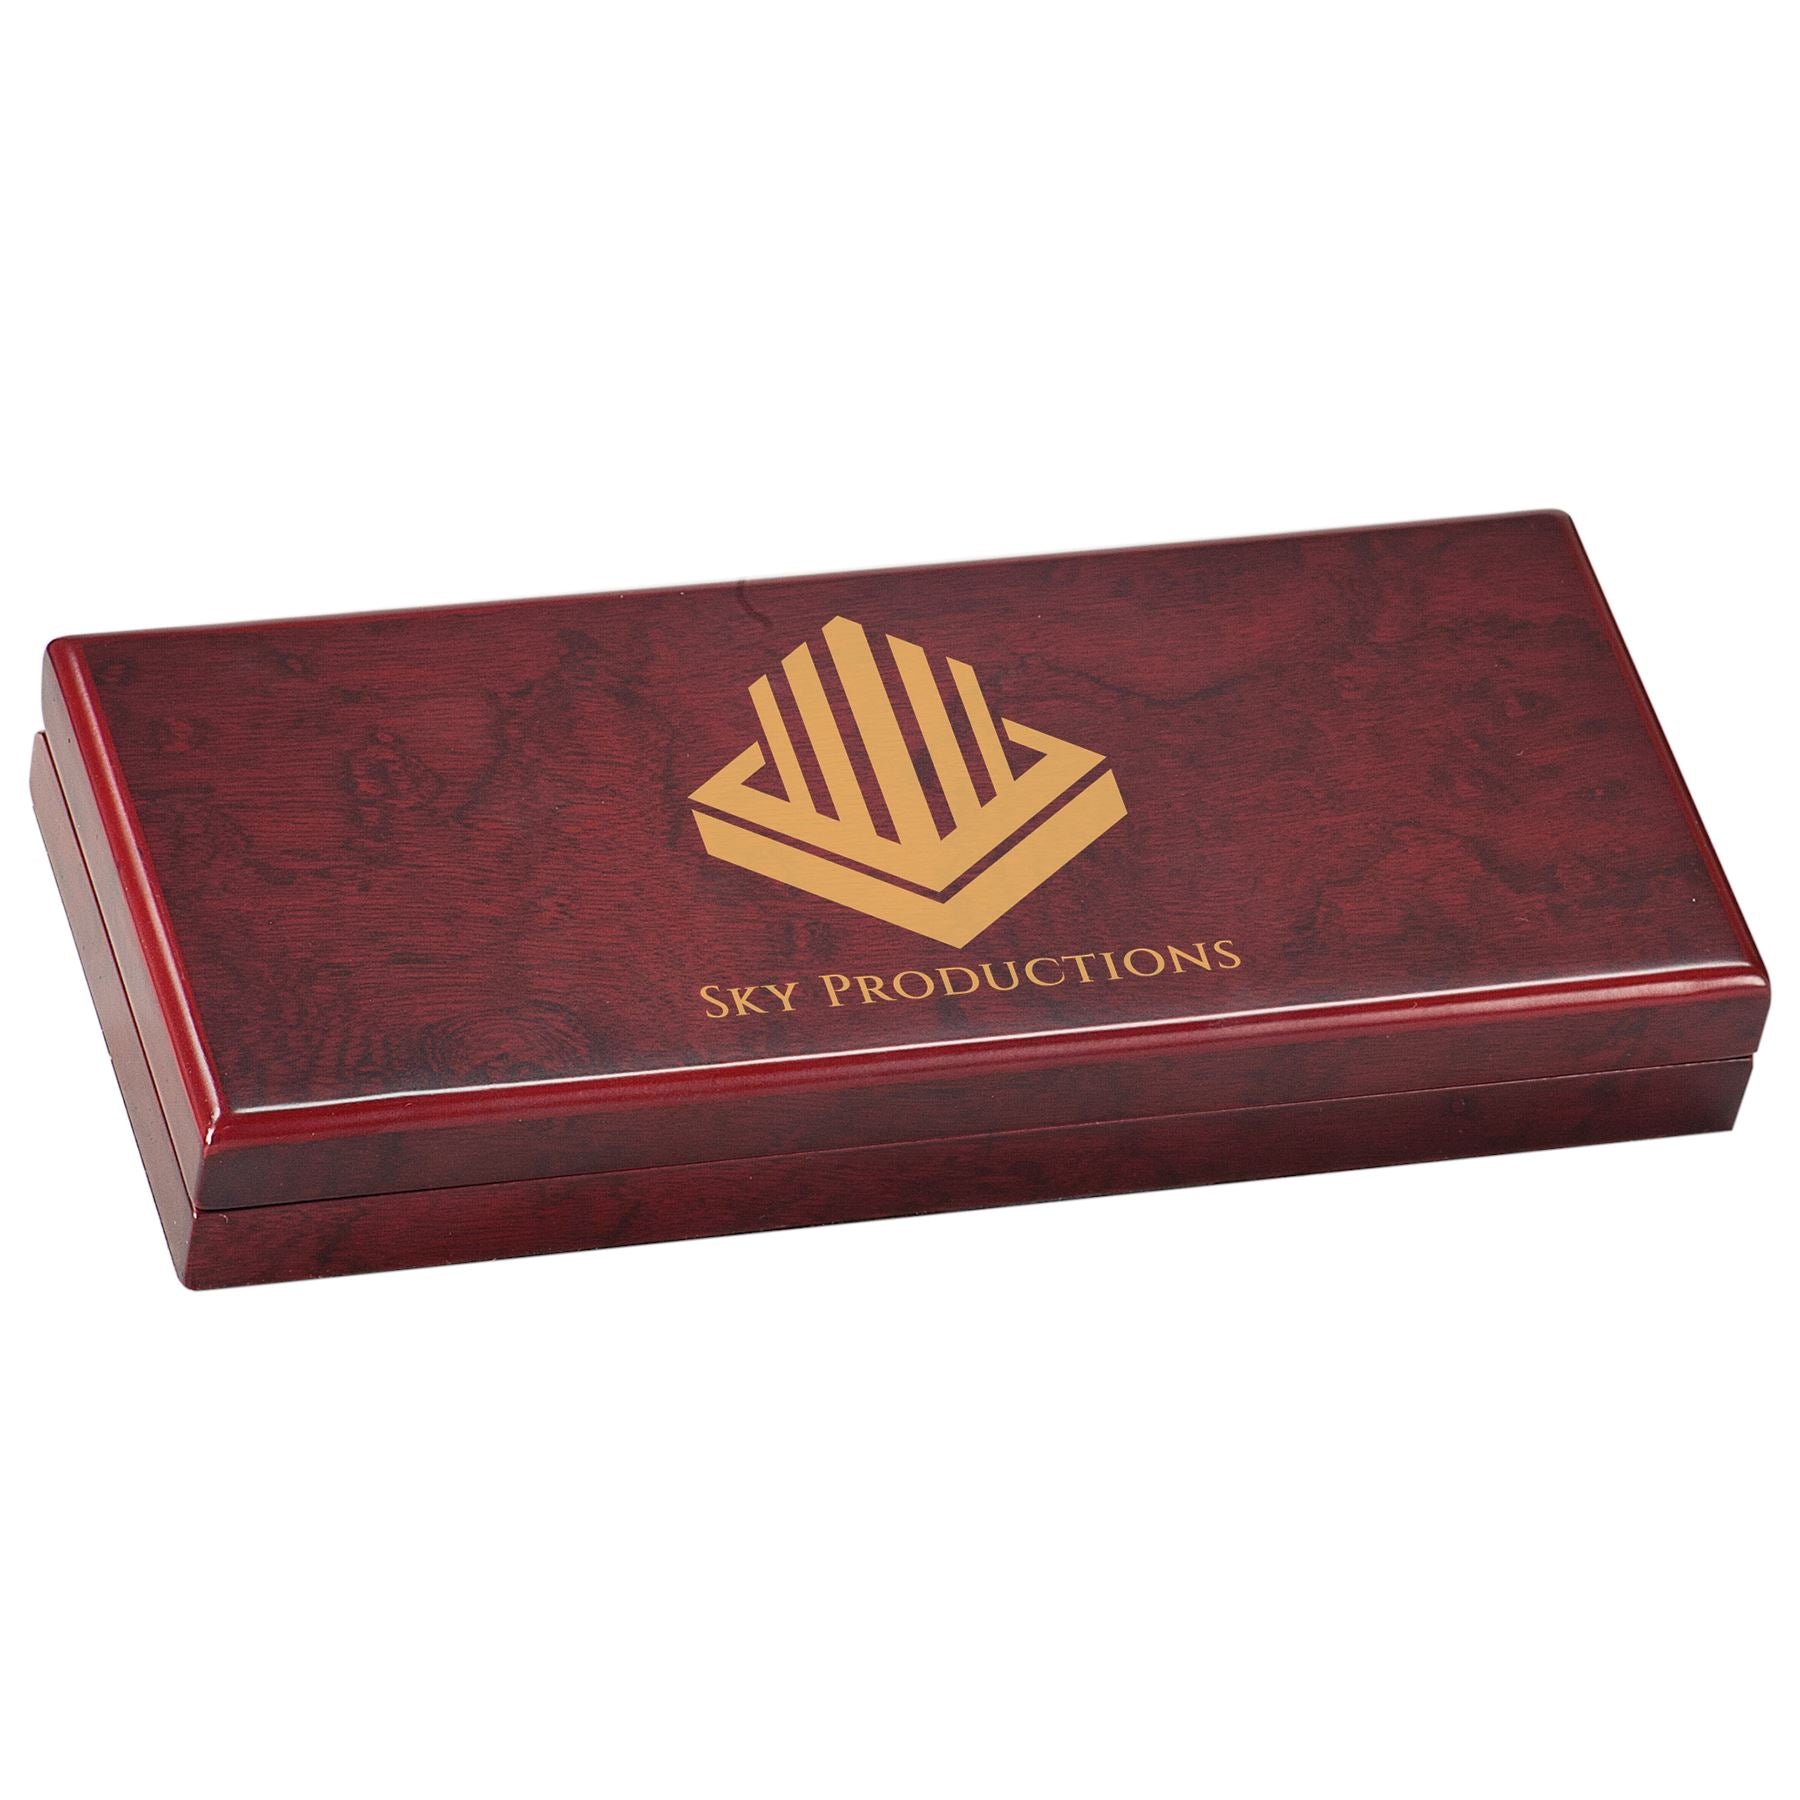 Rosewood Piano Finish Gift Box, 8 3/4" x 3 3/4" x 1 1/4", Laser Engraved Gift Box Craftworks NW 